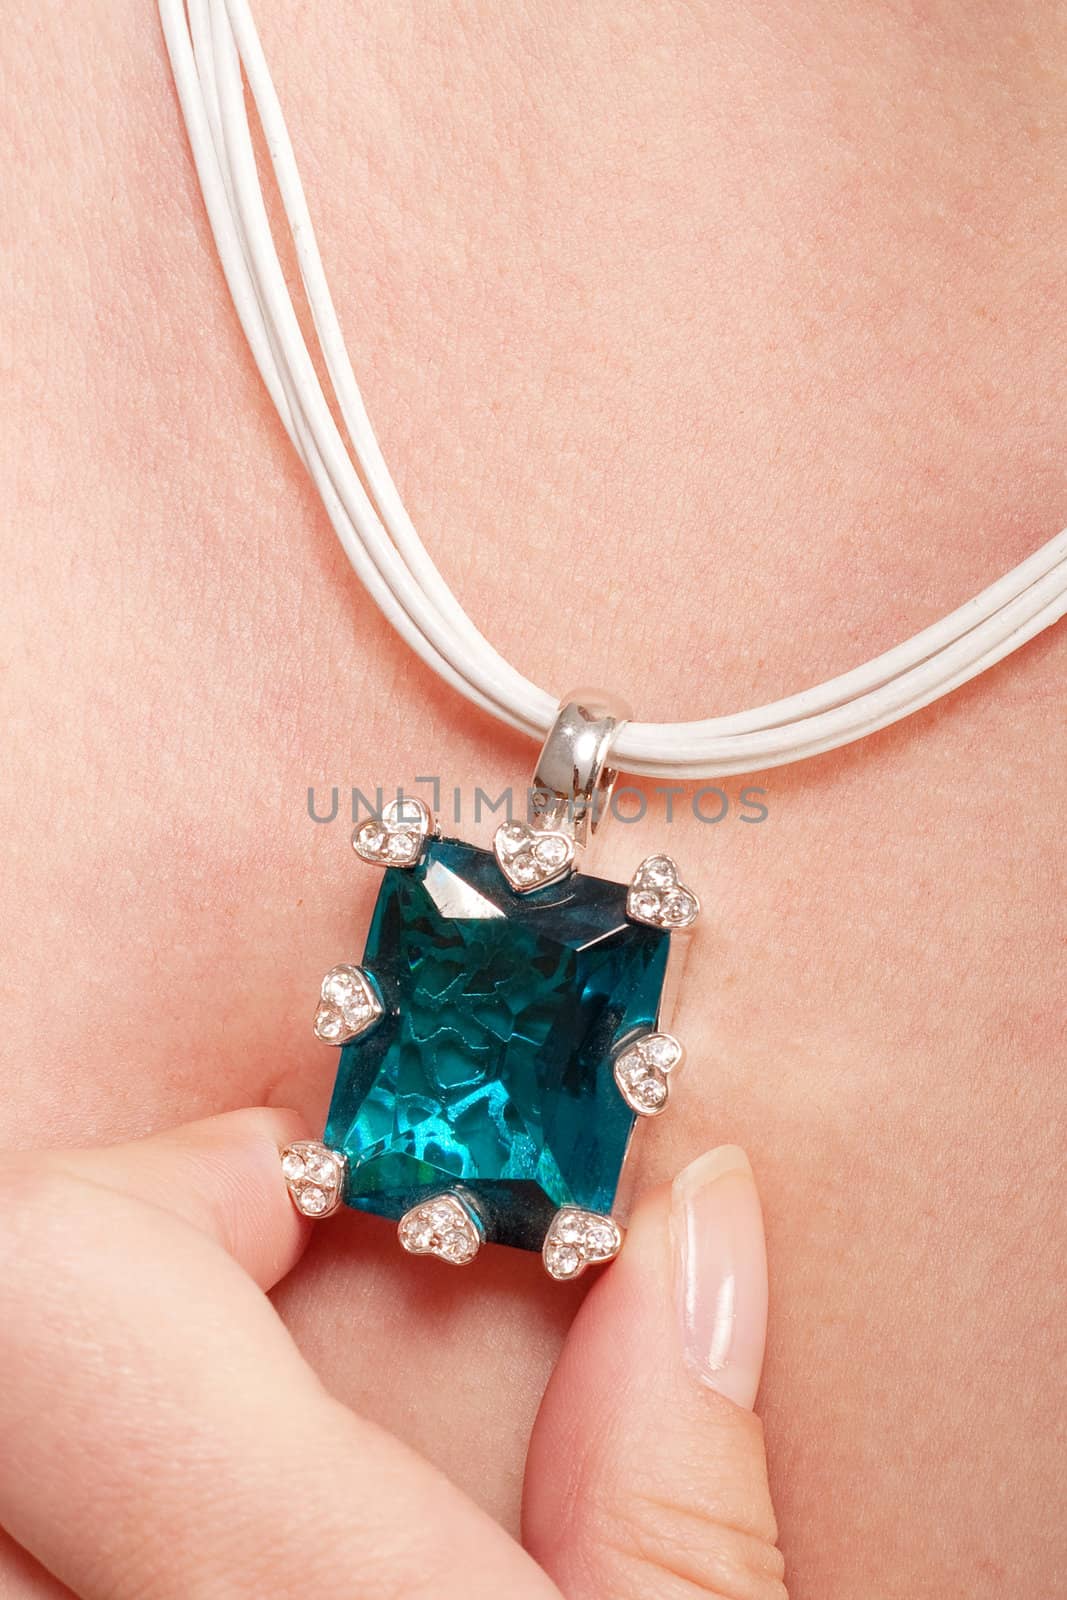 Necklace with blue gem keeping up with fingers